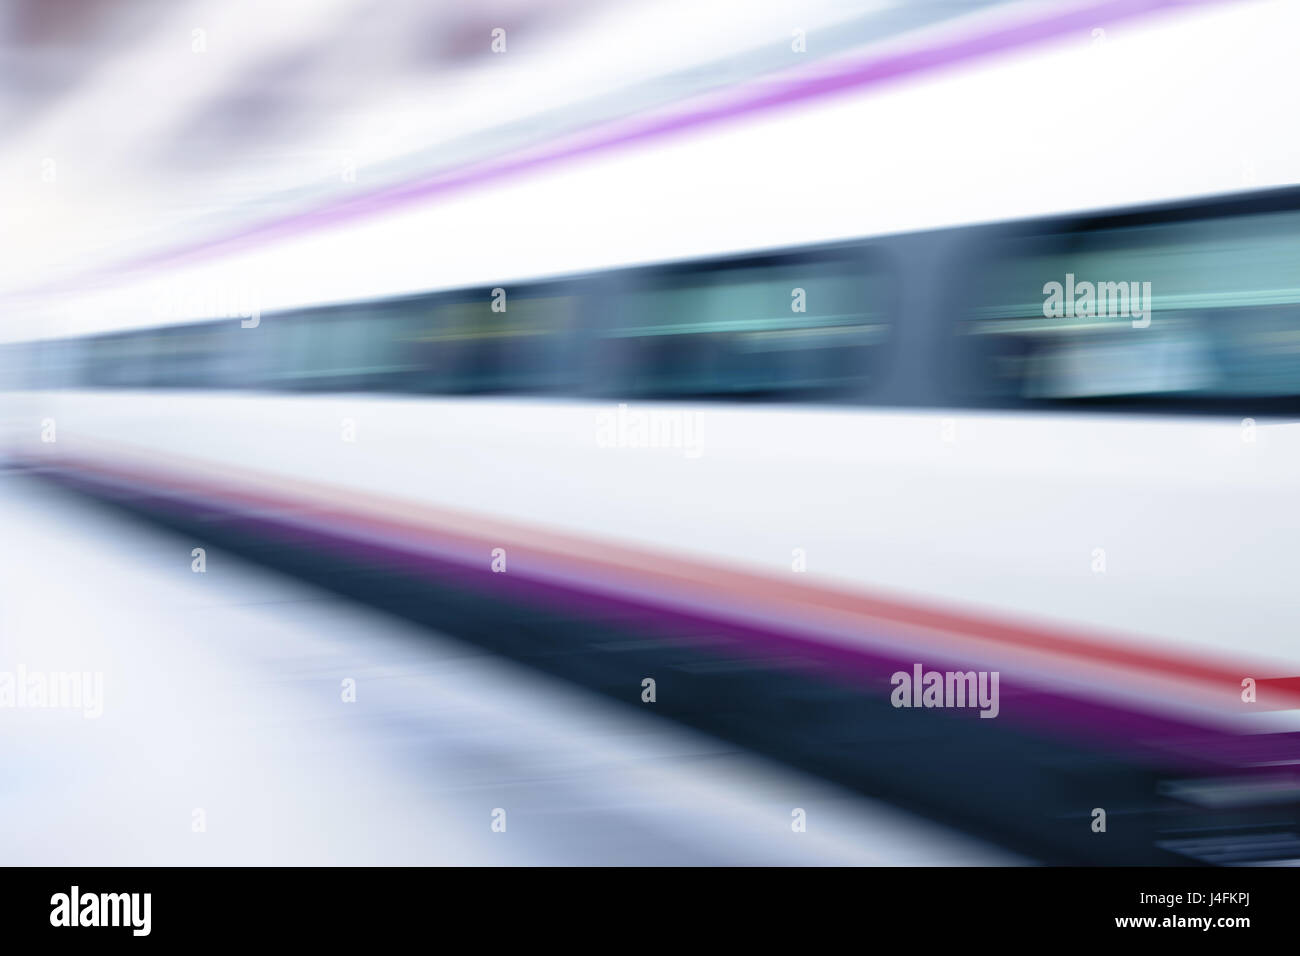 High speed train in motion blur - abstract background Stock Photo